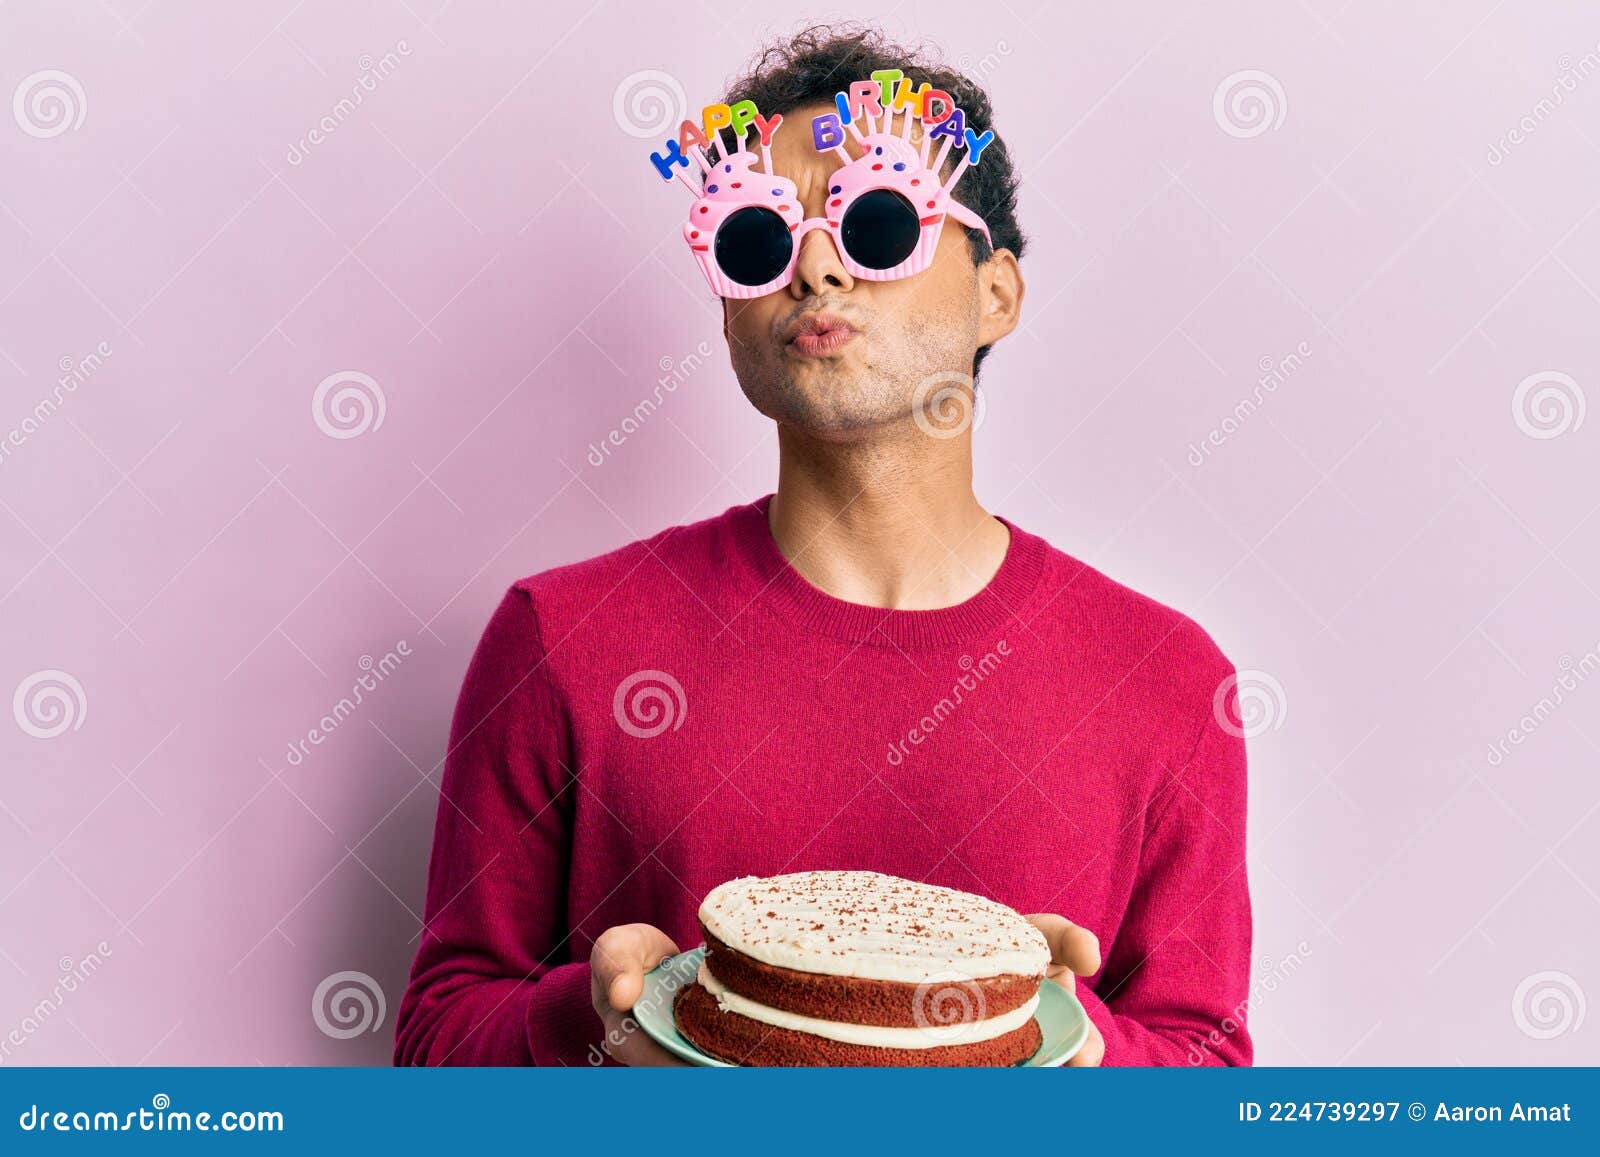 Handsome Hispanic Man Wearing Funny Happy Birthday Glasses Holding Cake  Looking at the Camera Blowing a Kiss Being Lovely and Stock Image - Image  of background, adorable: 224739297